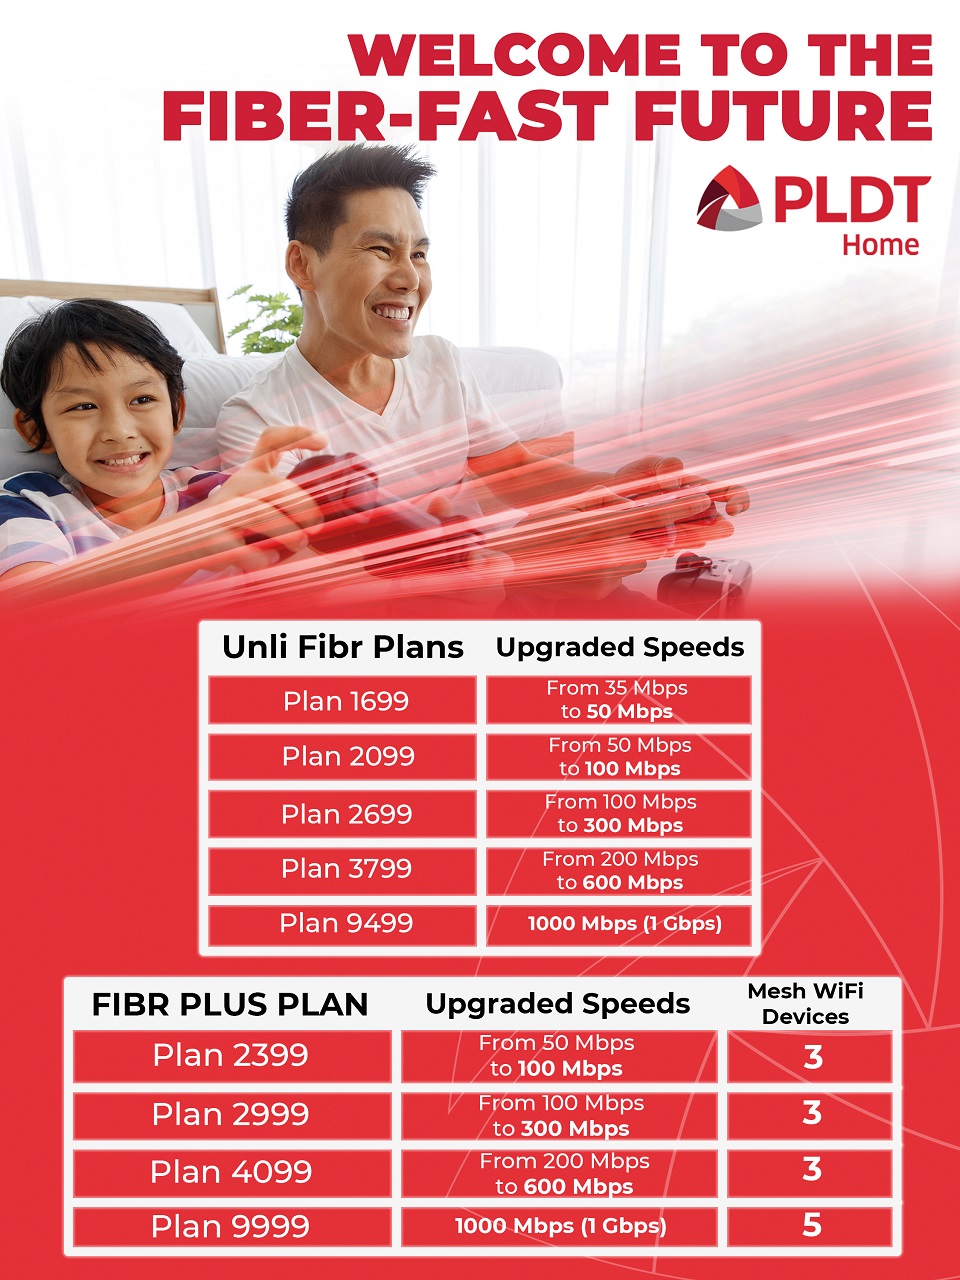 Pldt Home Unveils Fibr Plans With Speed Upgrades Of Up To 600mbps